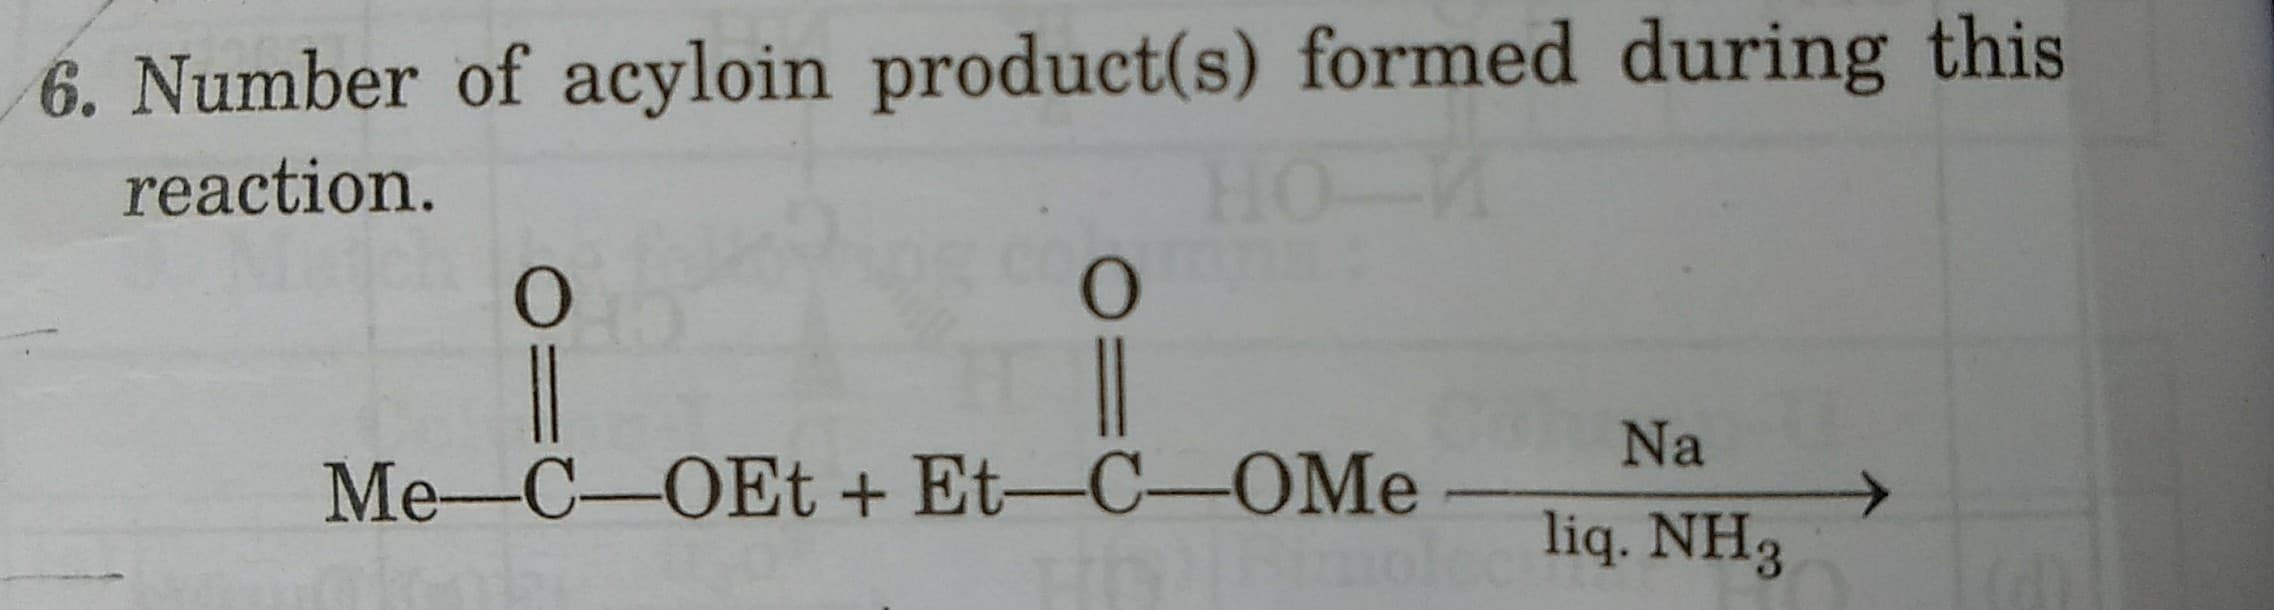 6. Number of acyloin product(s) formed during this
reaction.
HO-
Na
Me-C-OEt + Et-C-OMe
liq. NH3
